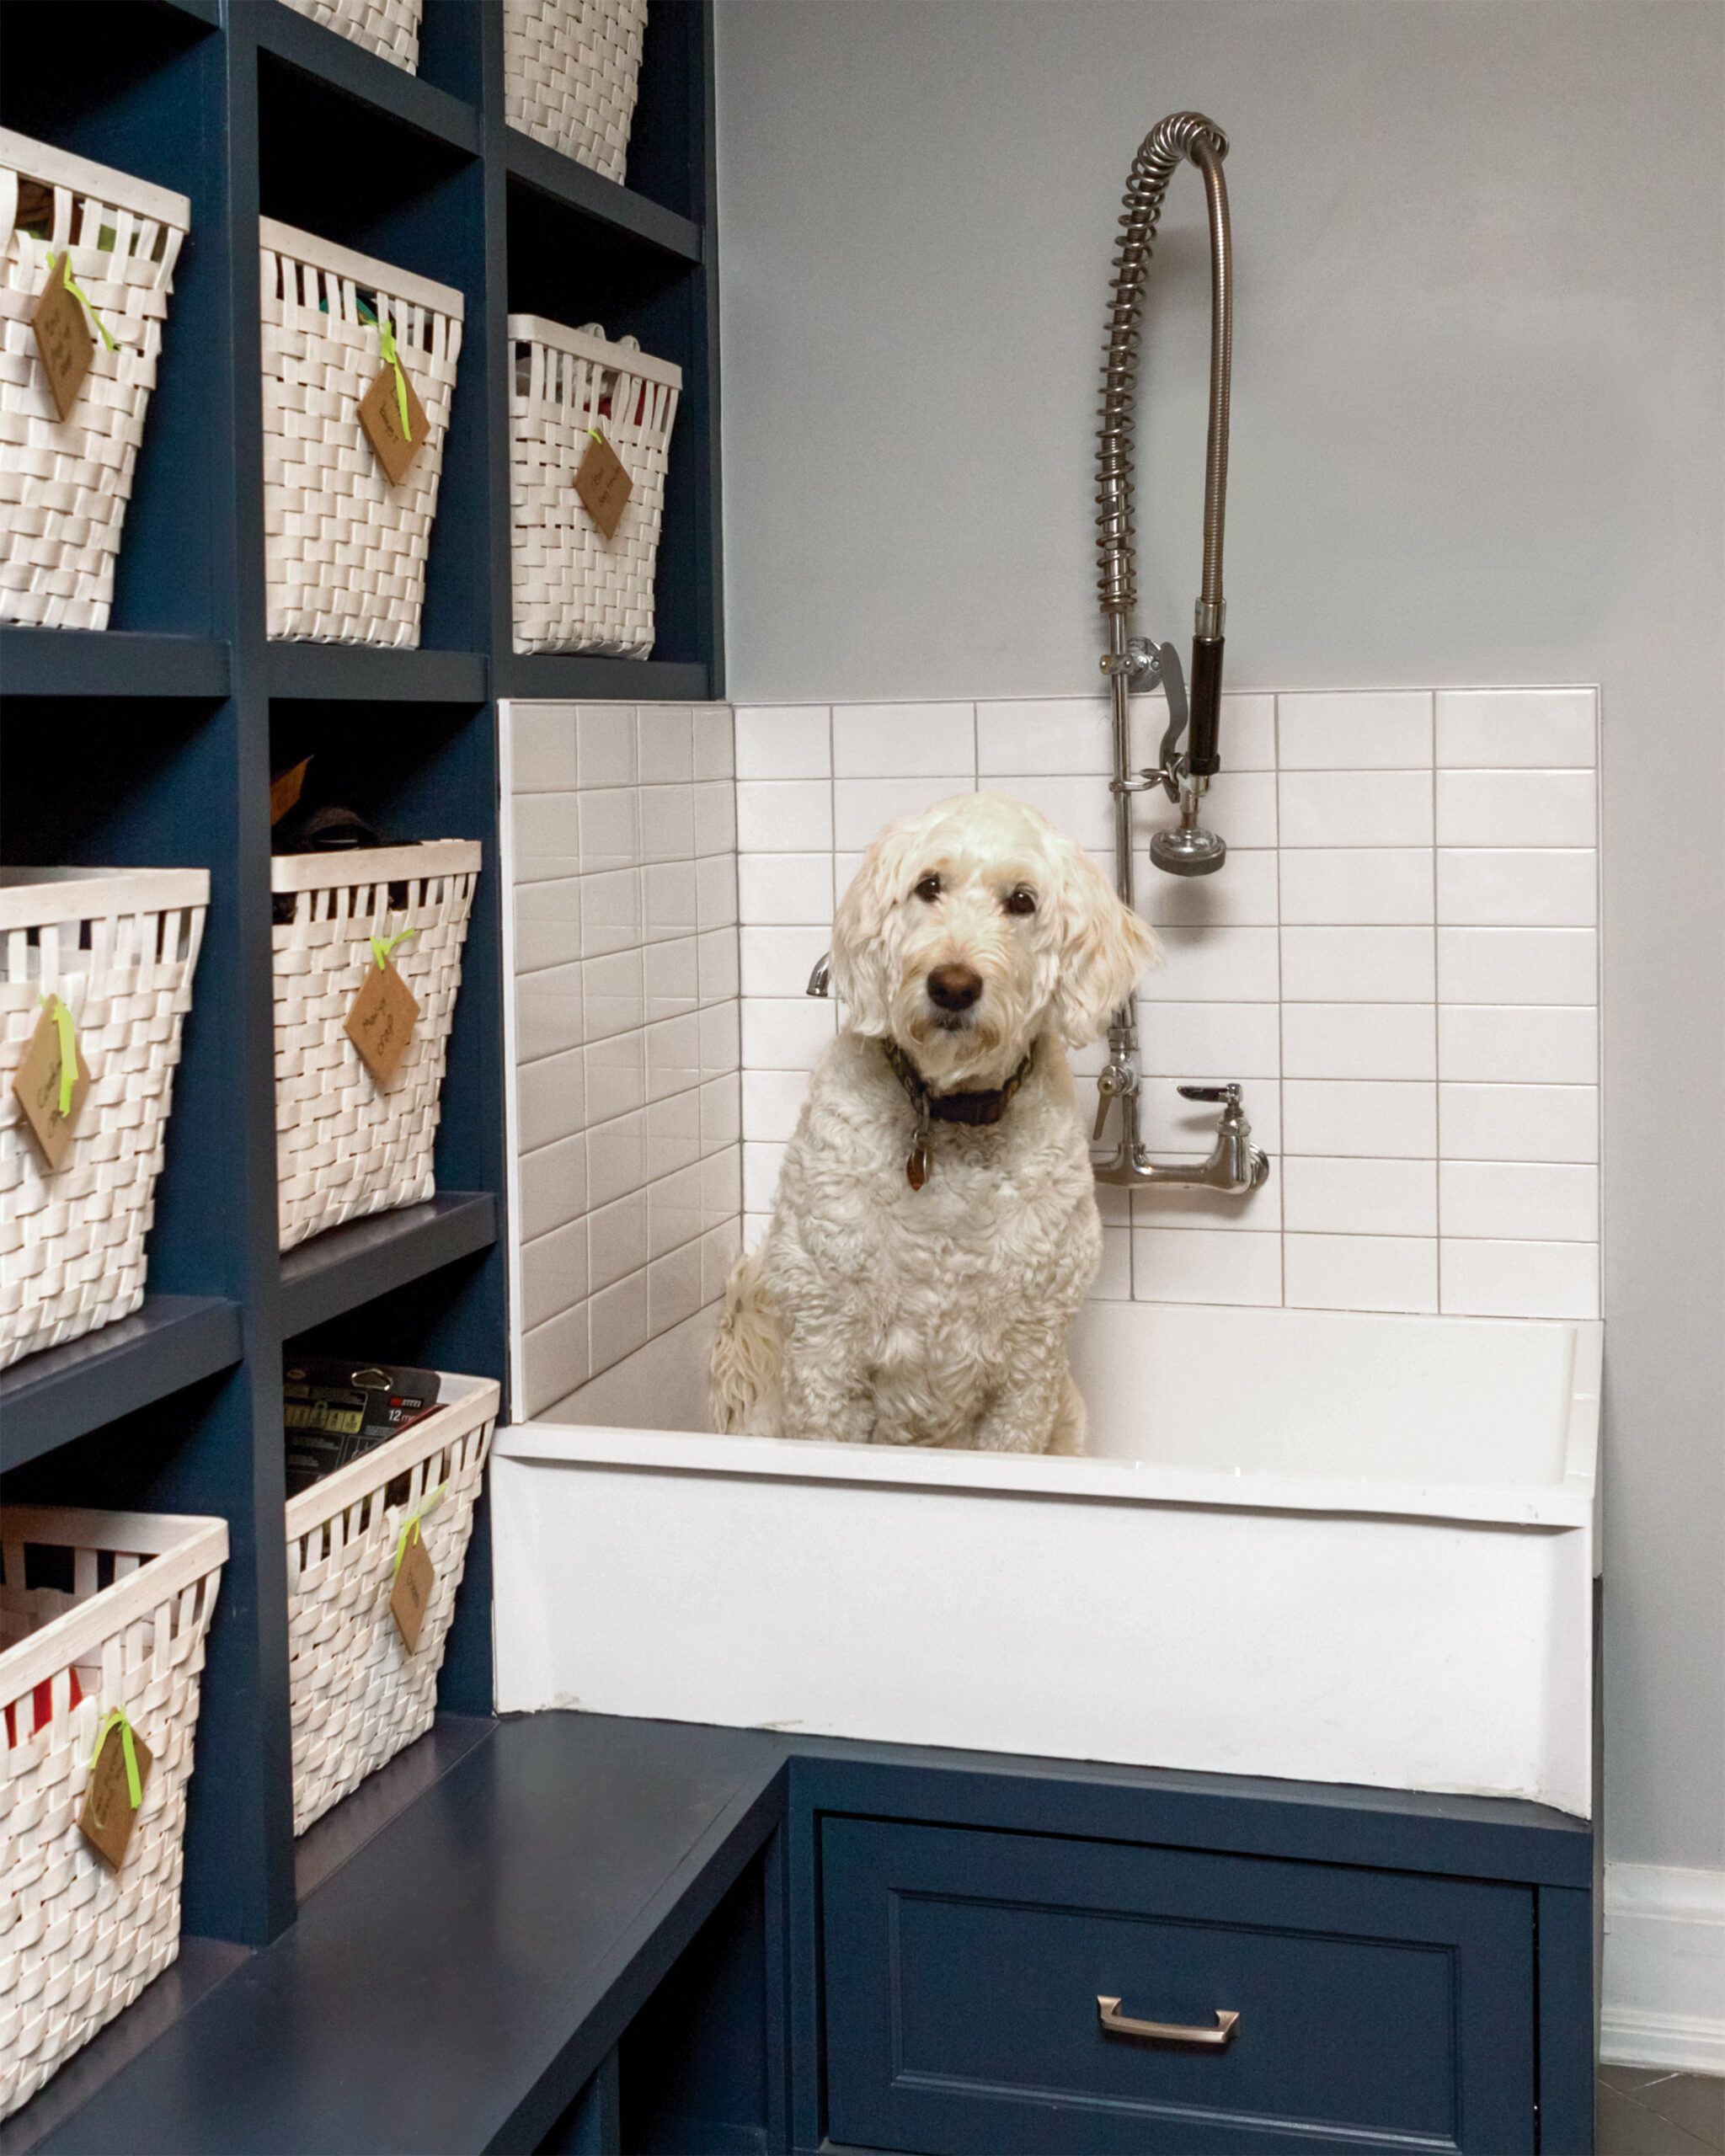 Soggy Doggy Pet Wash offers convenient DIY service